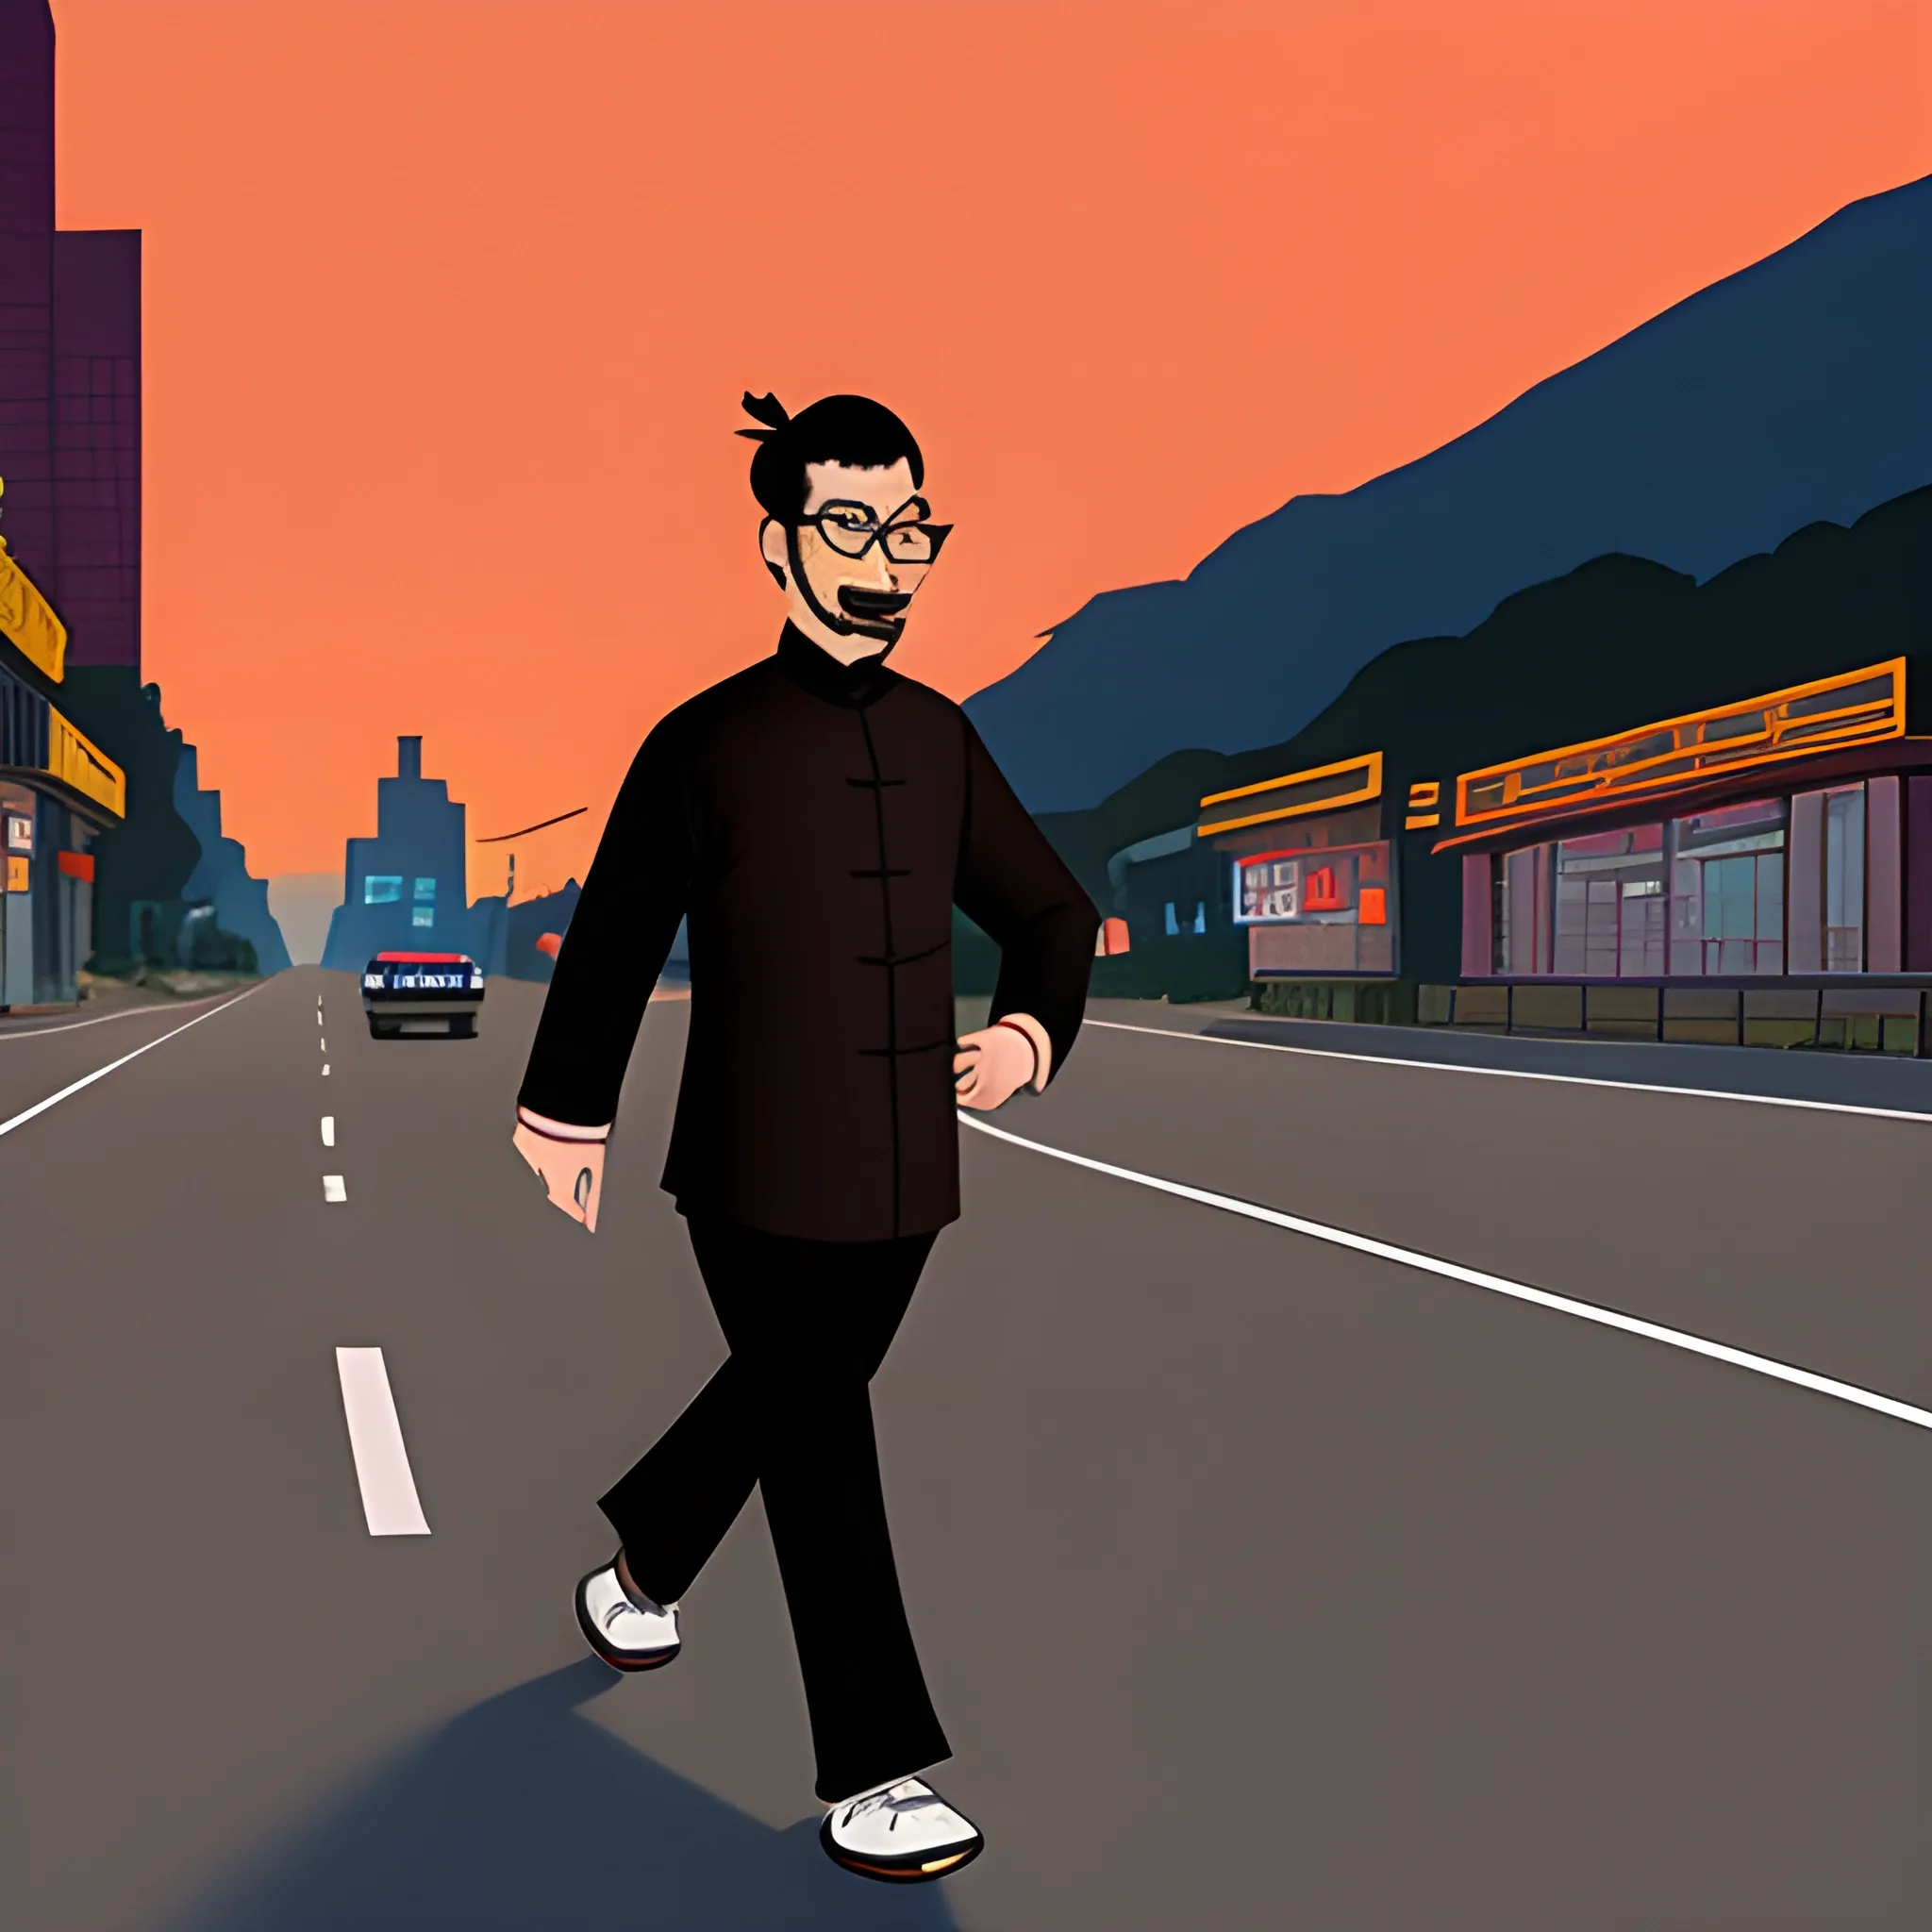 Chinese down-and-out man, decadent, newly unemployed, with short hair, glasses, beard, thin figure, walking on the road at dusk, Cartoon